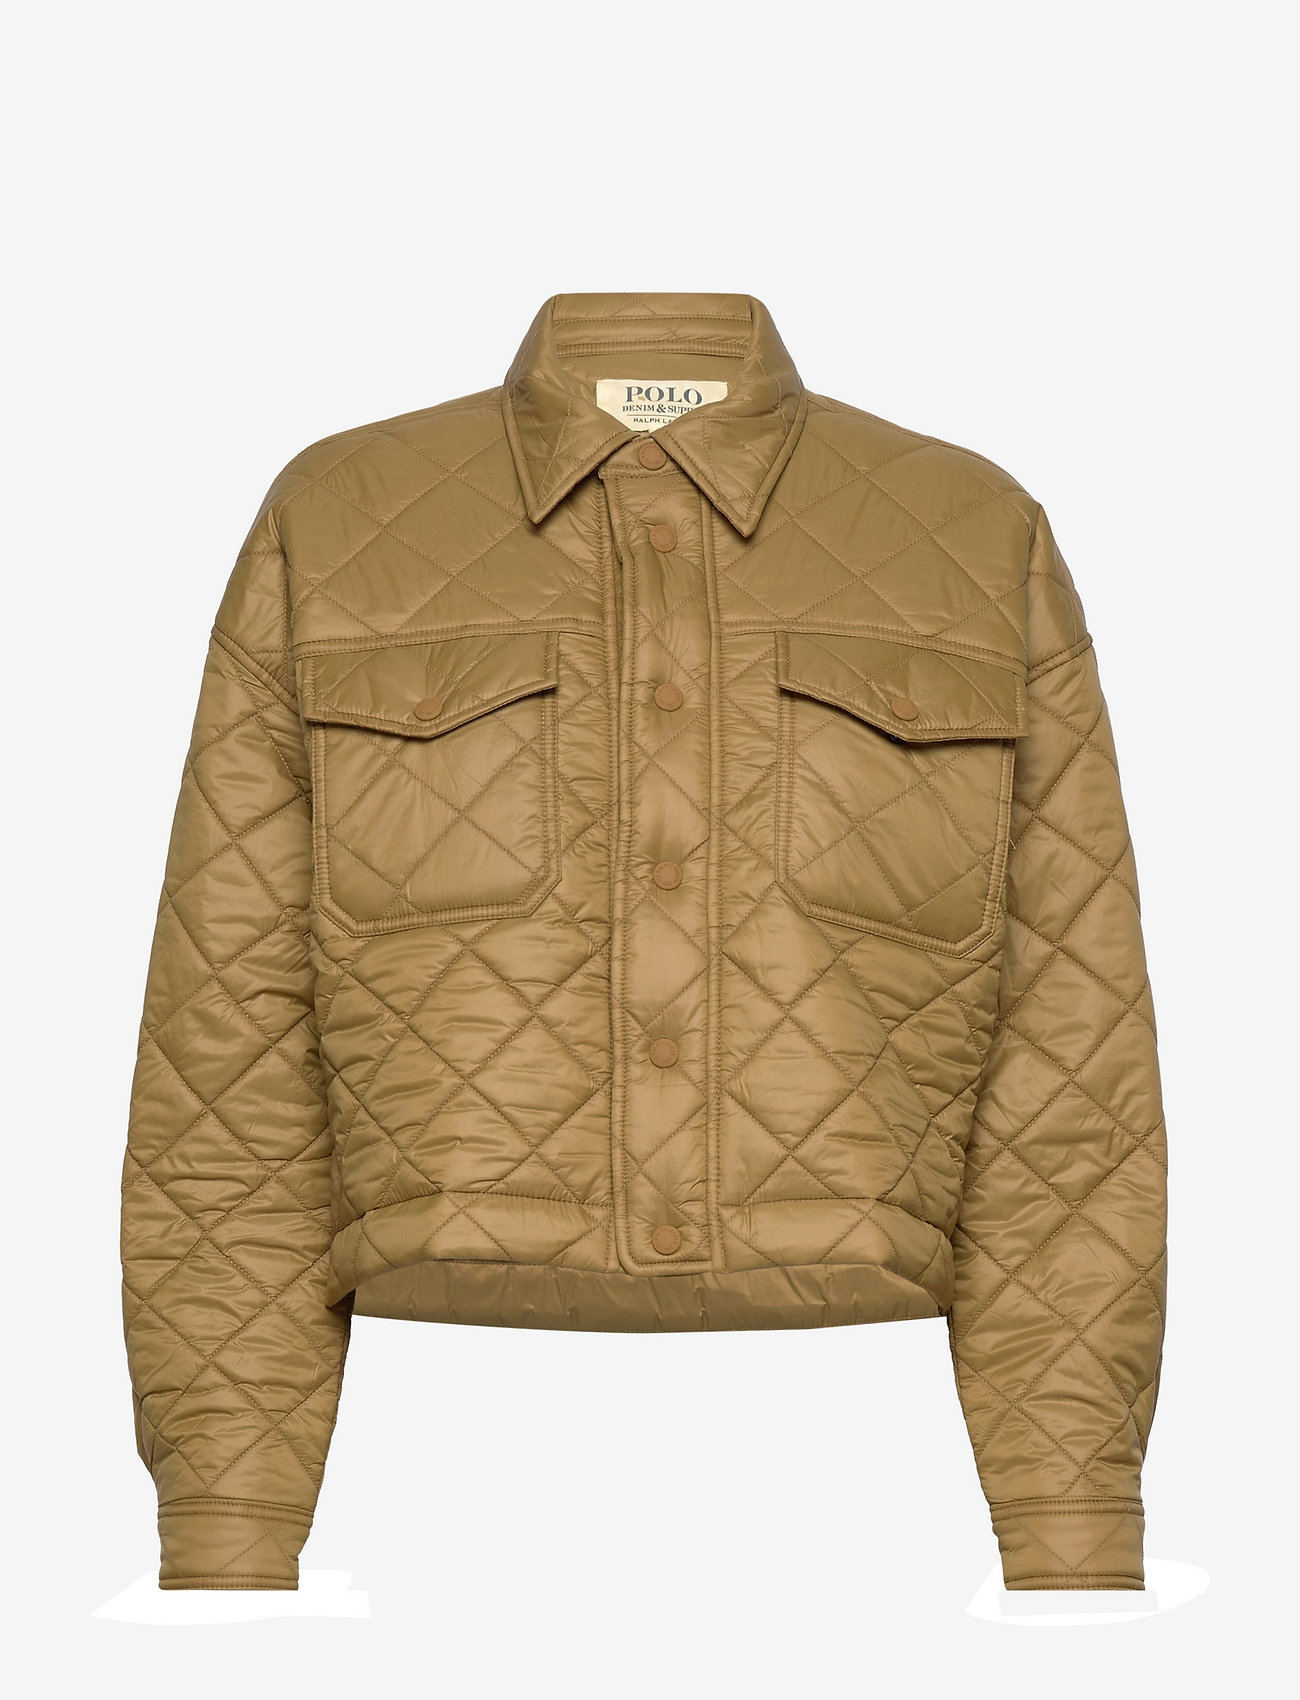 Excuse me progeny Mittens Polo Ralph Lauren Water-repellant Cropped Quilted Jacket - 179.55 €. Buy  Quilted jackets from Polo Ralph Lauren online at Boozt.com. Fast delivery  and easy returns